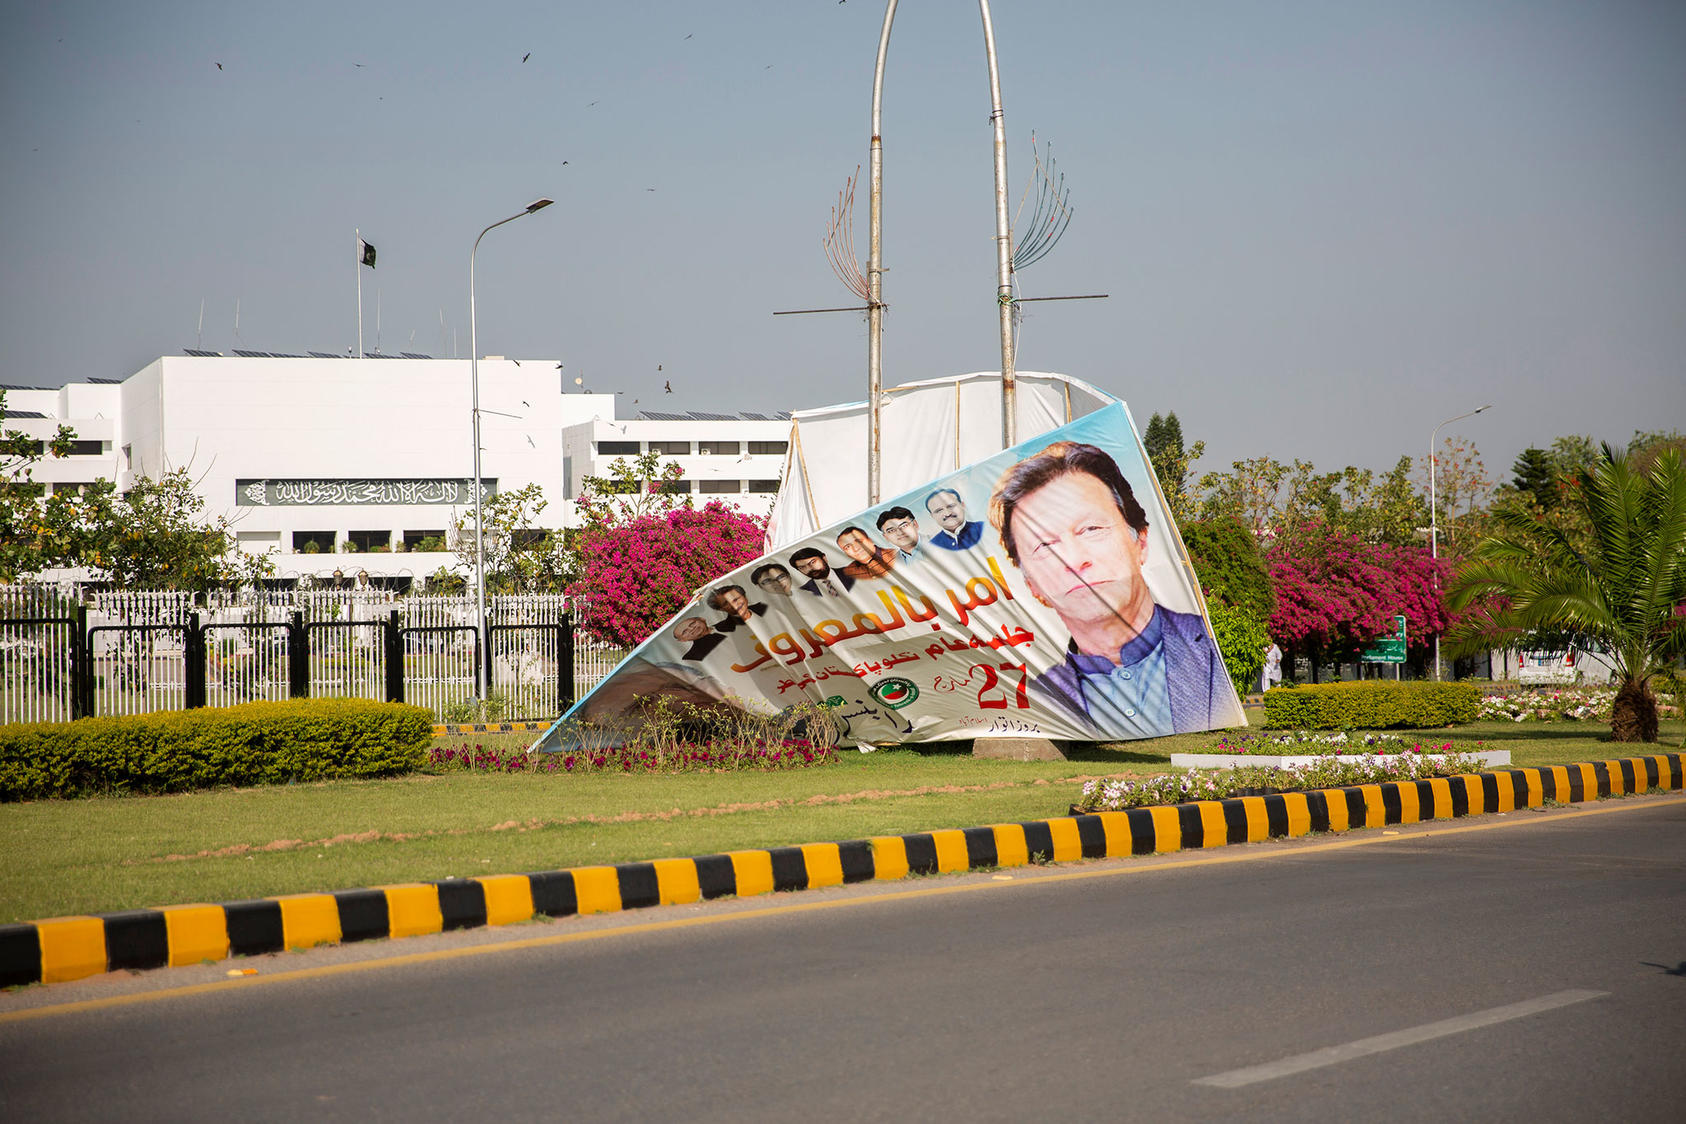 A poster of deposed Prime Minister Imran Khan in front of the National Assembly in Islamabad on Monday, April 4, 2022. Khan was removed from office on April 10 following a vote of no confidence. (Saiyna Bashir/The New York Times)